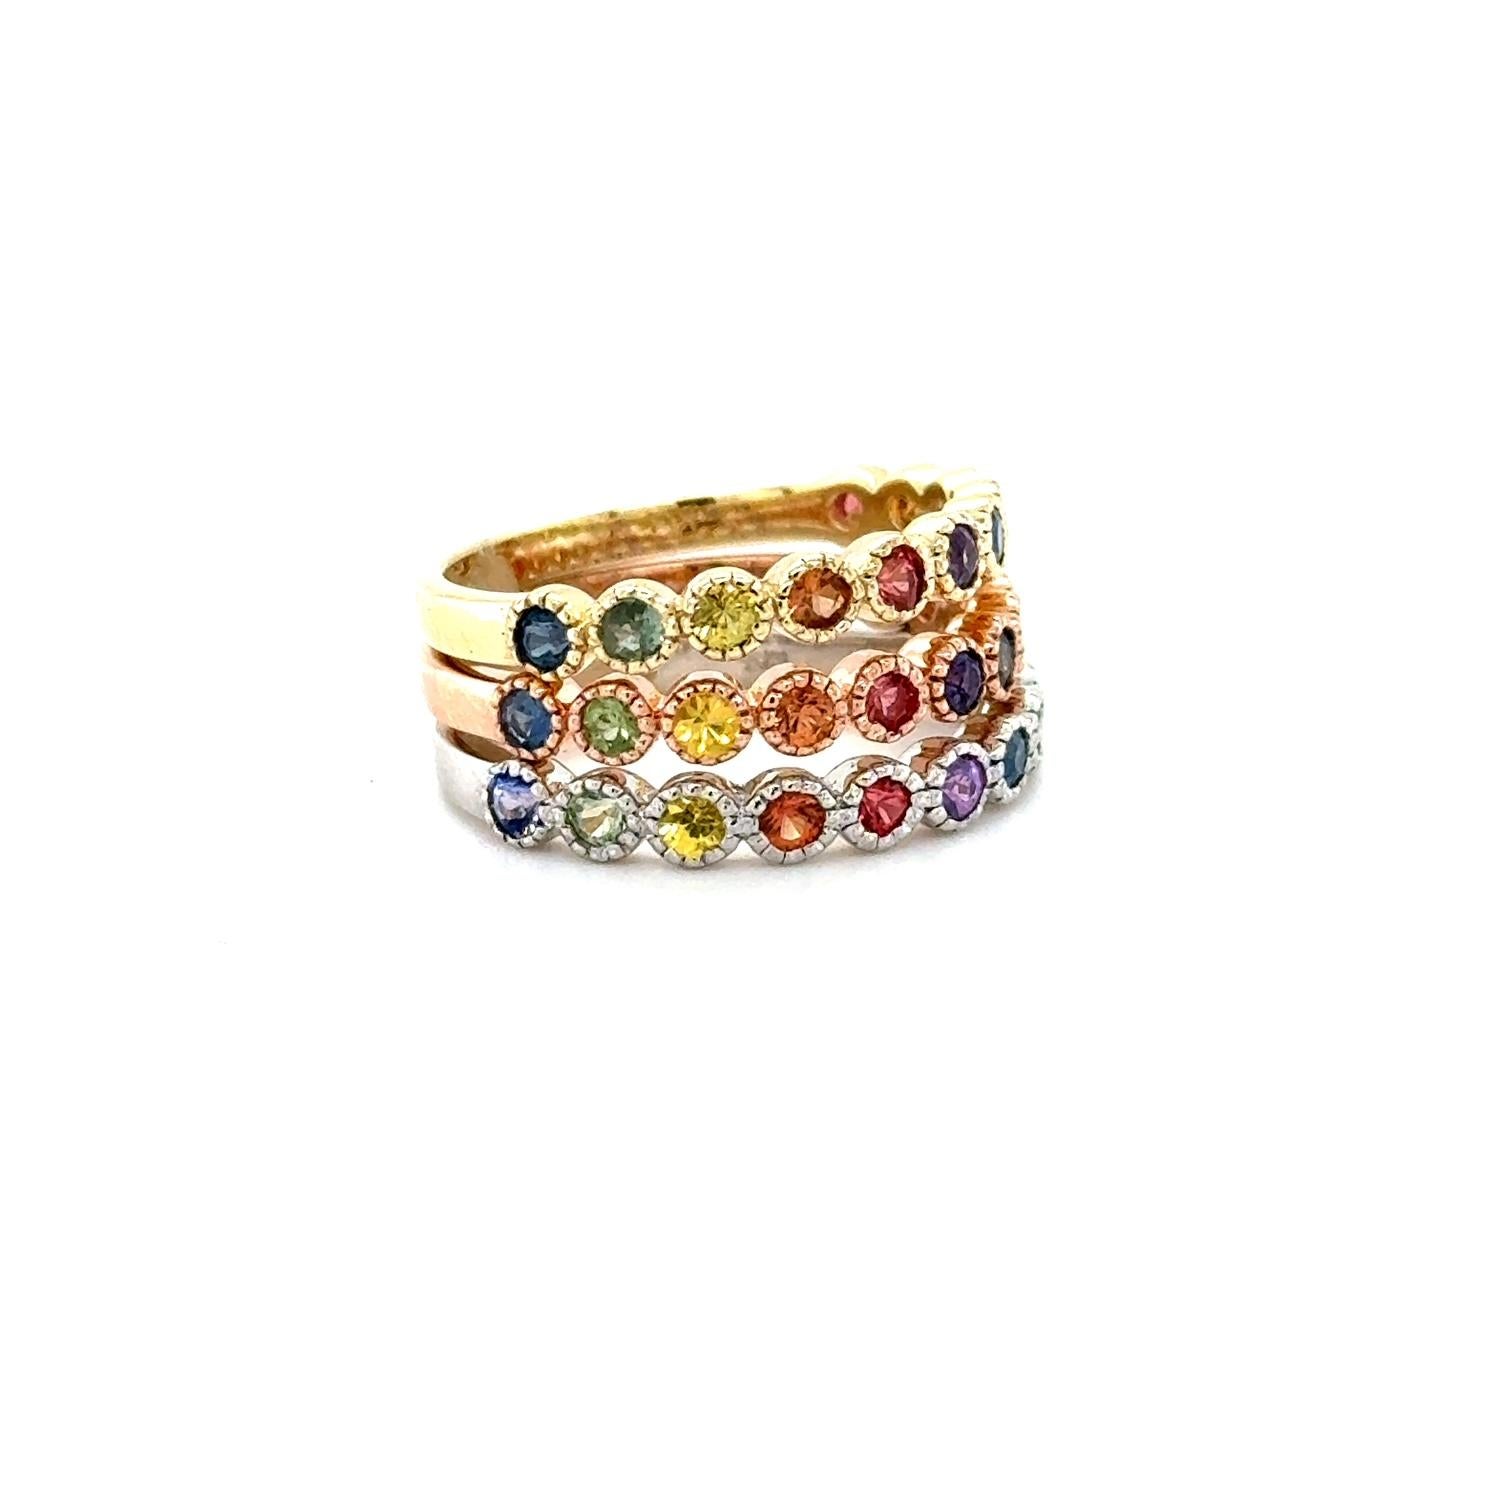 Set of 3 elegant and classy 1.82 Carat Sapphire bands that are sure to be a great addition to your accessory collection! There are 11 Round Cut Sapphires in each band that weigh approximately 0.60 Carats each.  The total carat weight and number of